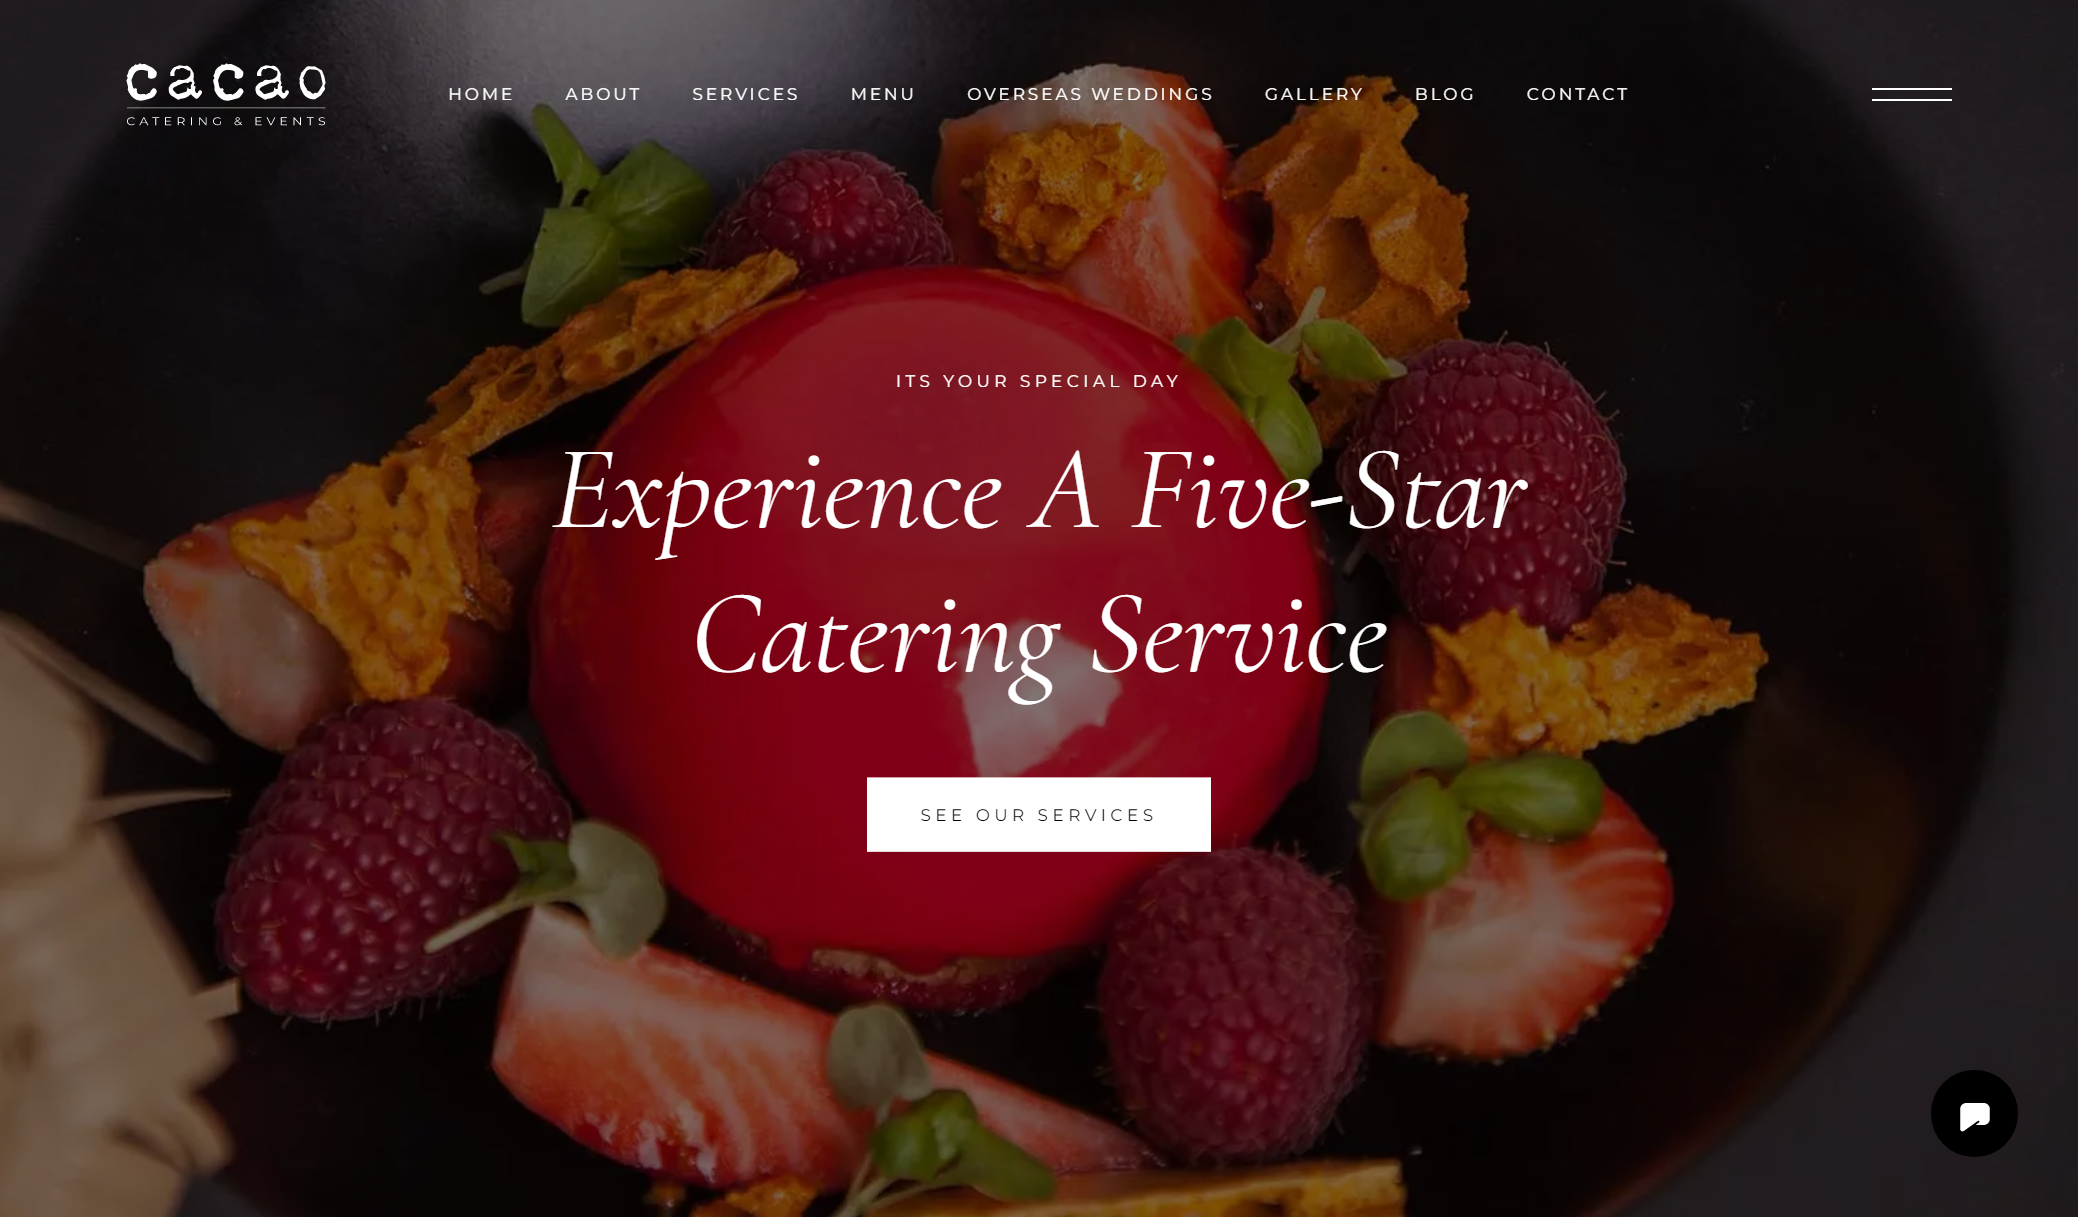 International Recognition for Cacao Catering & Events Website & Design